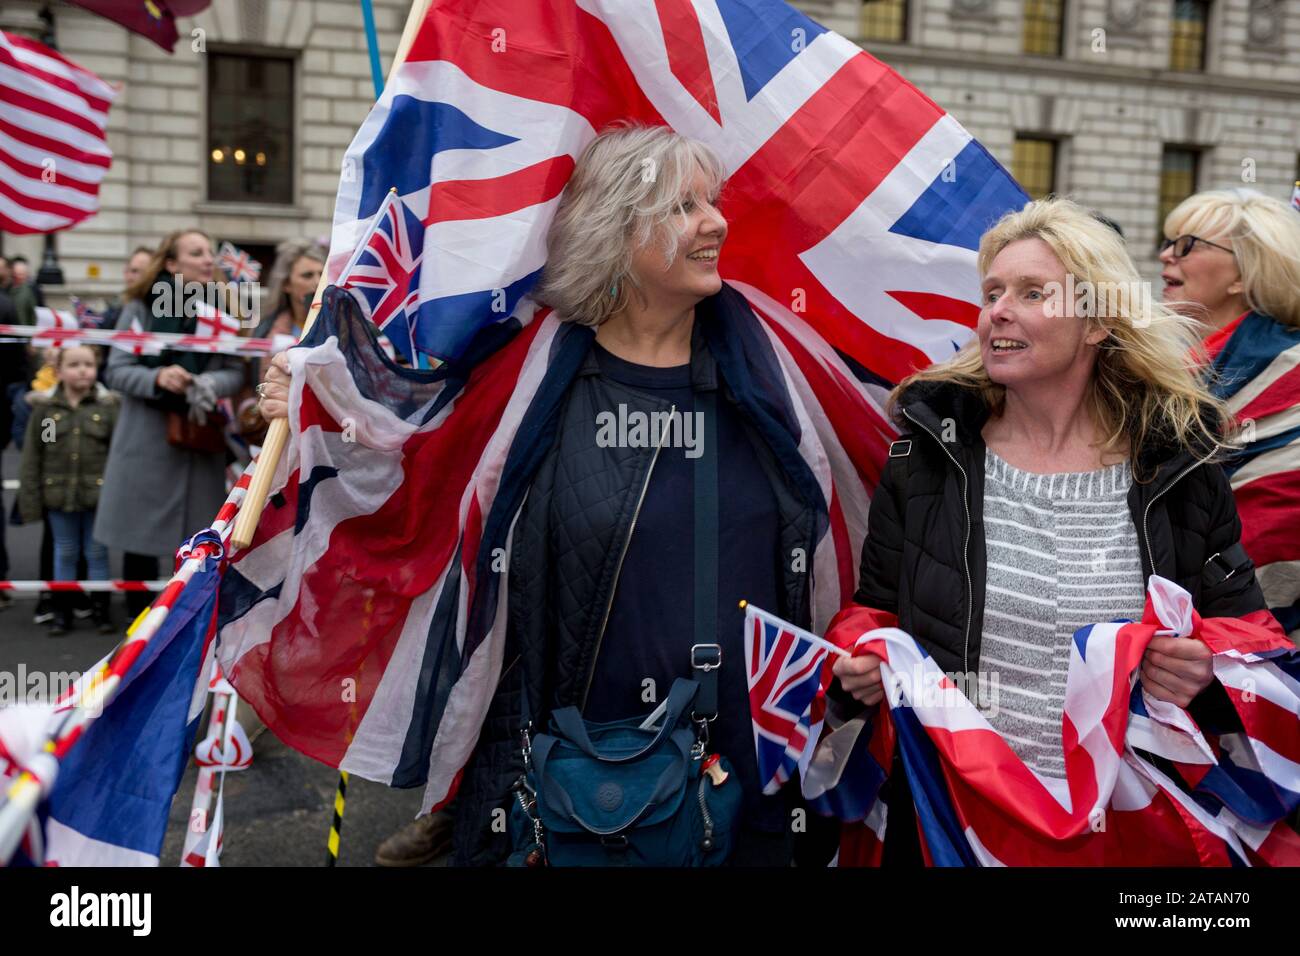 After threee and a half years of political upheavel in the British parliament, Brexiteers celebrate in Westminster on Brexit Day, the day when the UK legally leaves the European Union, on 31st January 2020, in London, England. Stock Photo